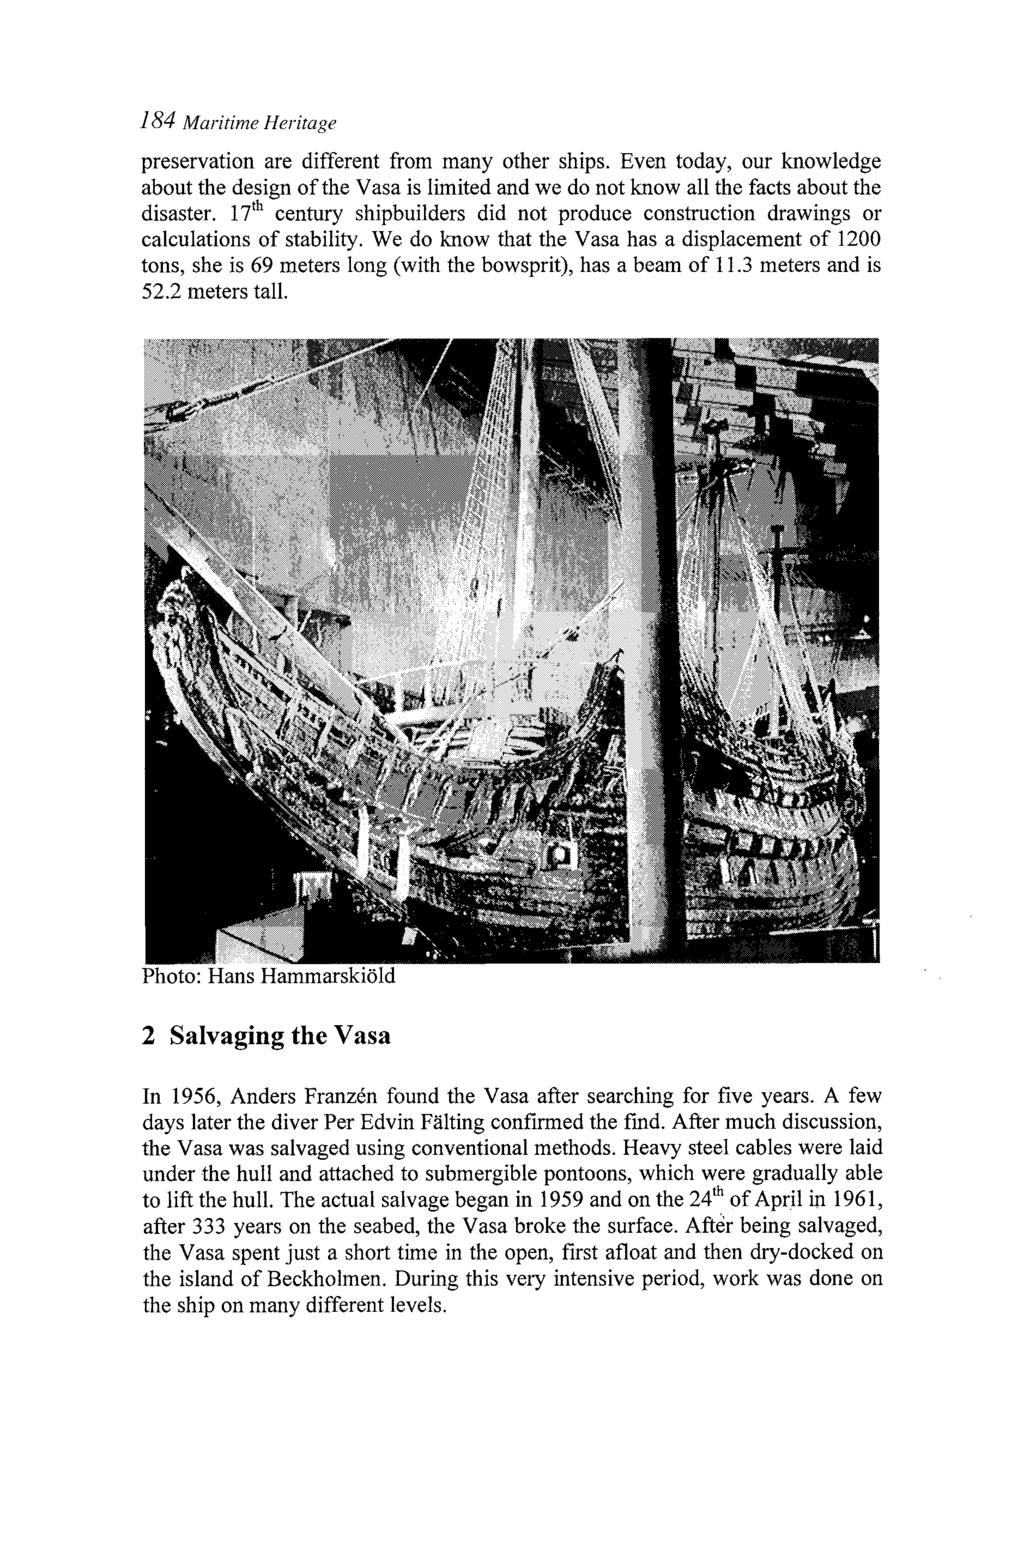 184 Maritime Heritage preservation are different from many other ships. Even today, our knowledge about the design of the Vasa is limited and we do not know all the facts about the disaster.